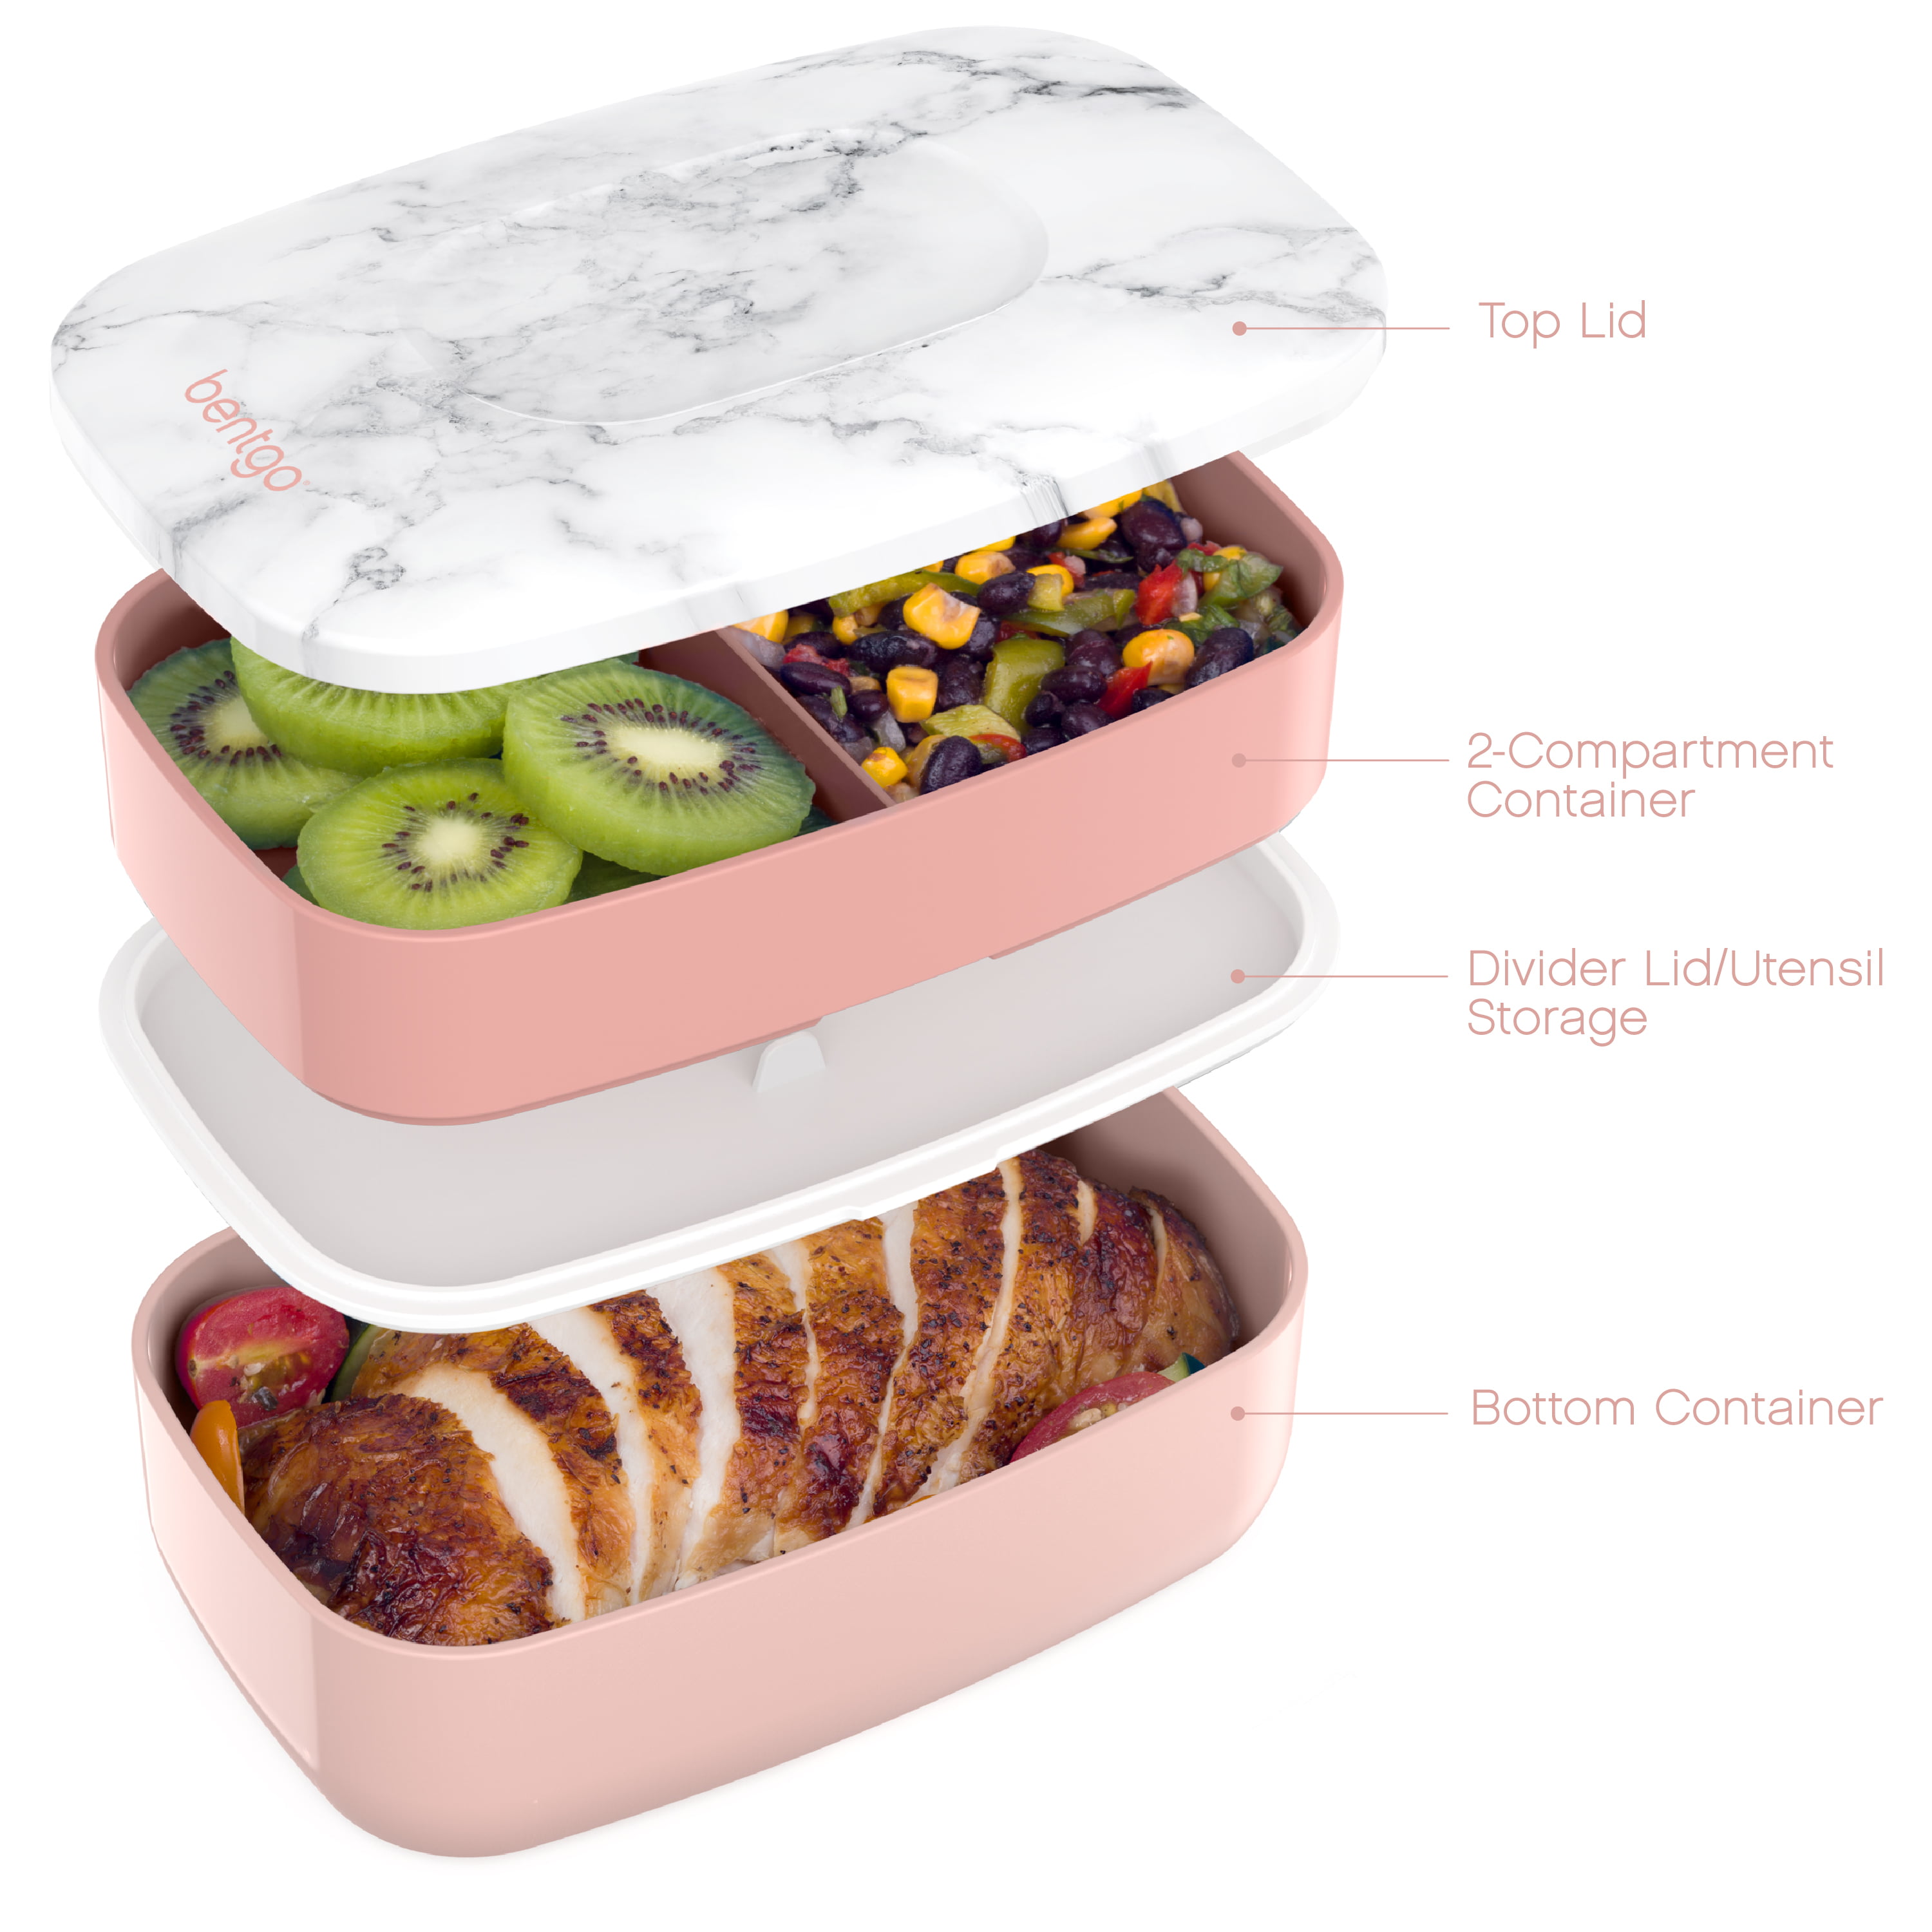 Bentgo Classic Blue All in One Stackable Lunch Box Solution Sleek and  Modern Bento Box Design Includes 2 Stackable Containers Built in Plastic  Silverware and Sealing Strap｜بحث TikTok